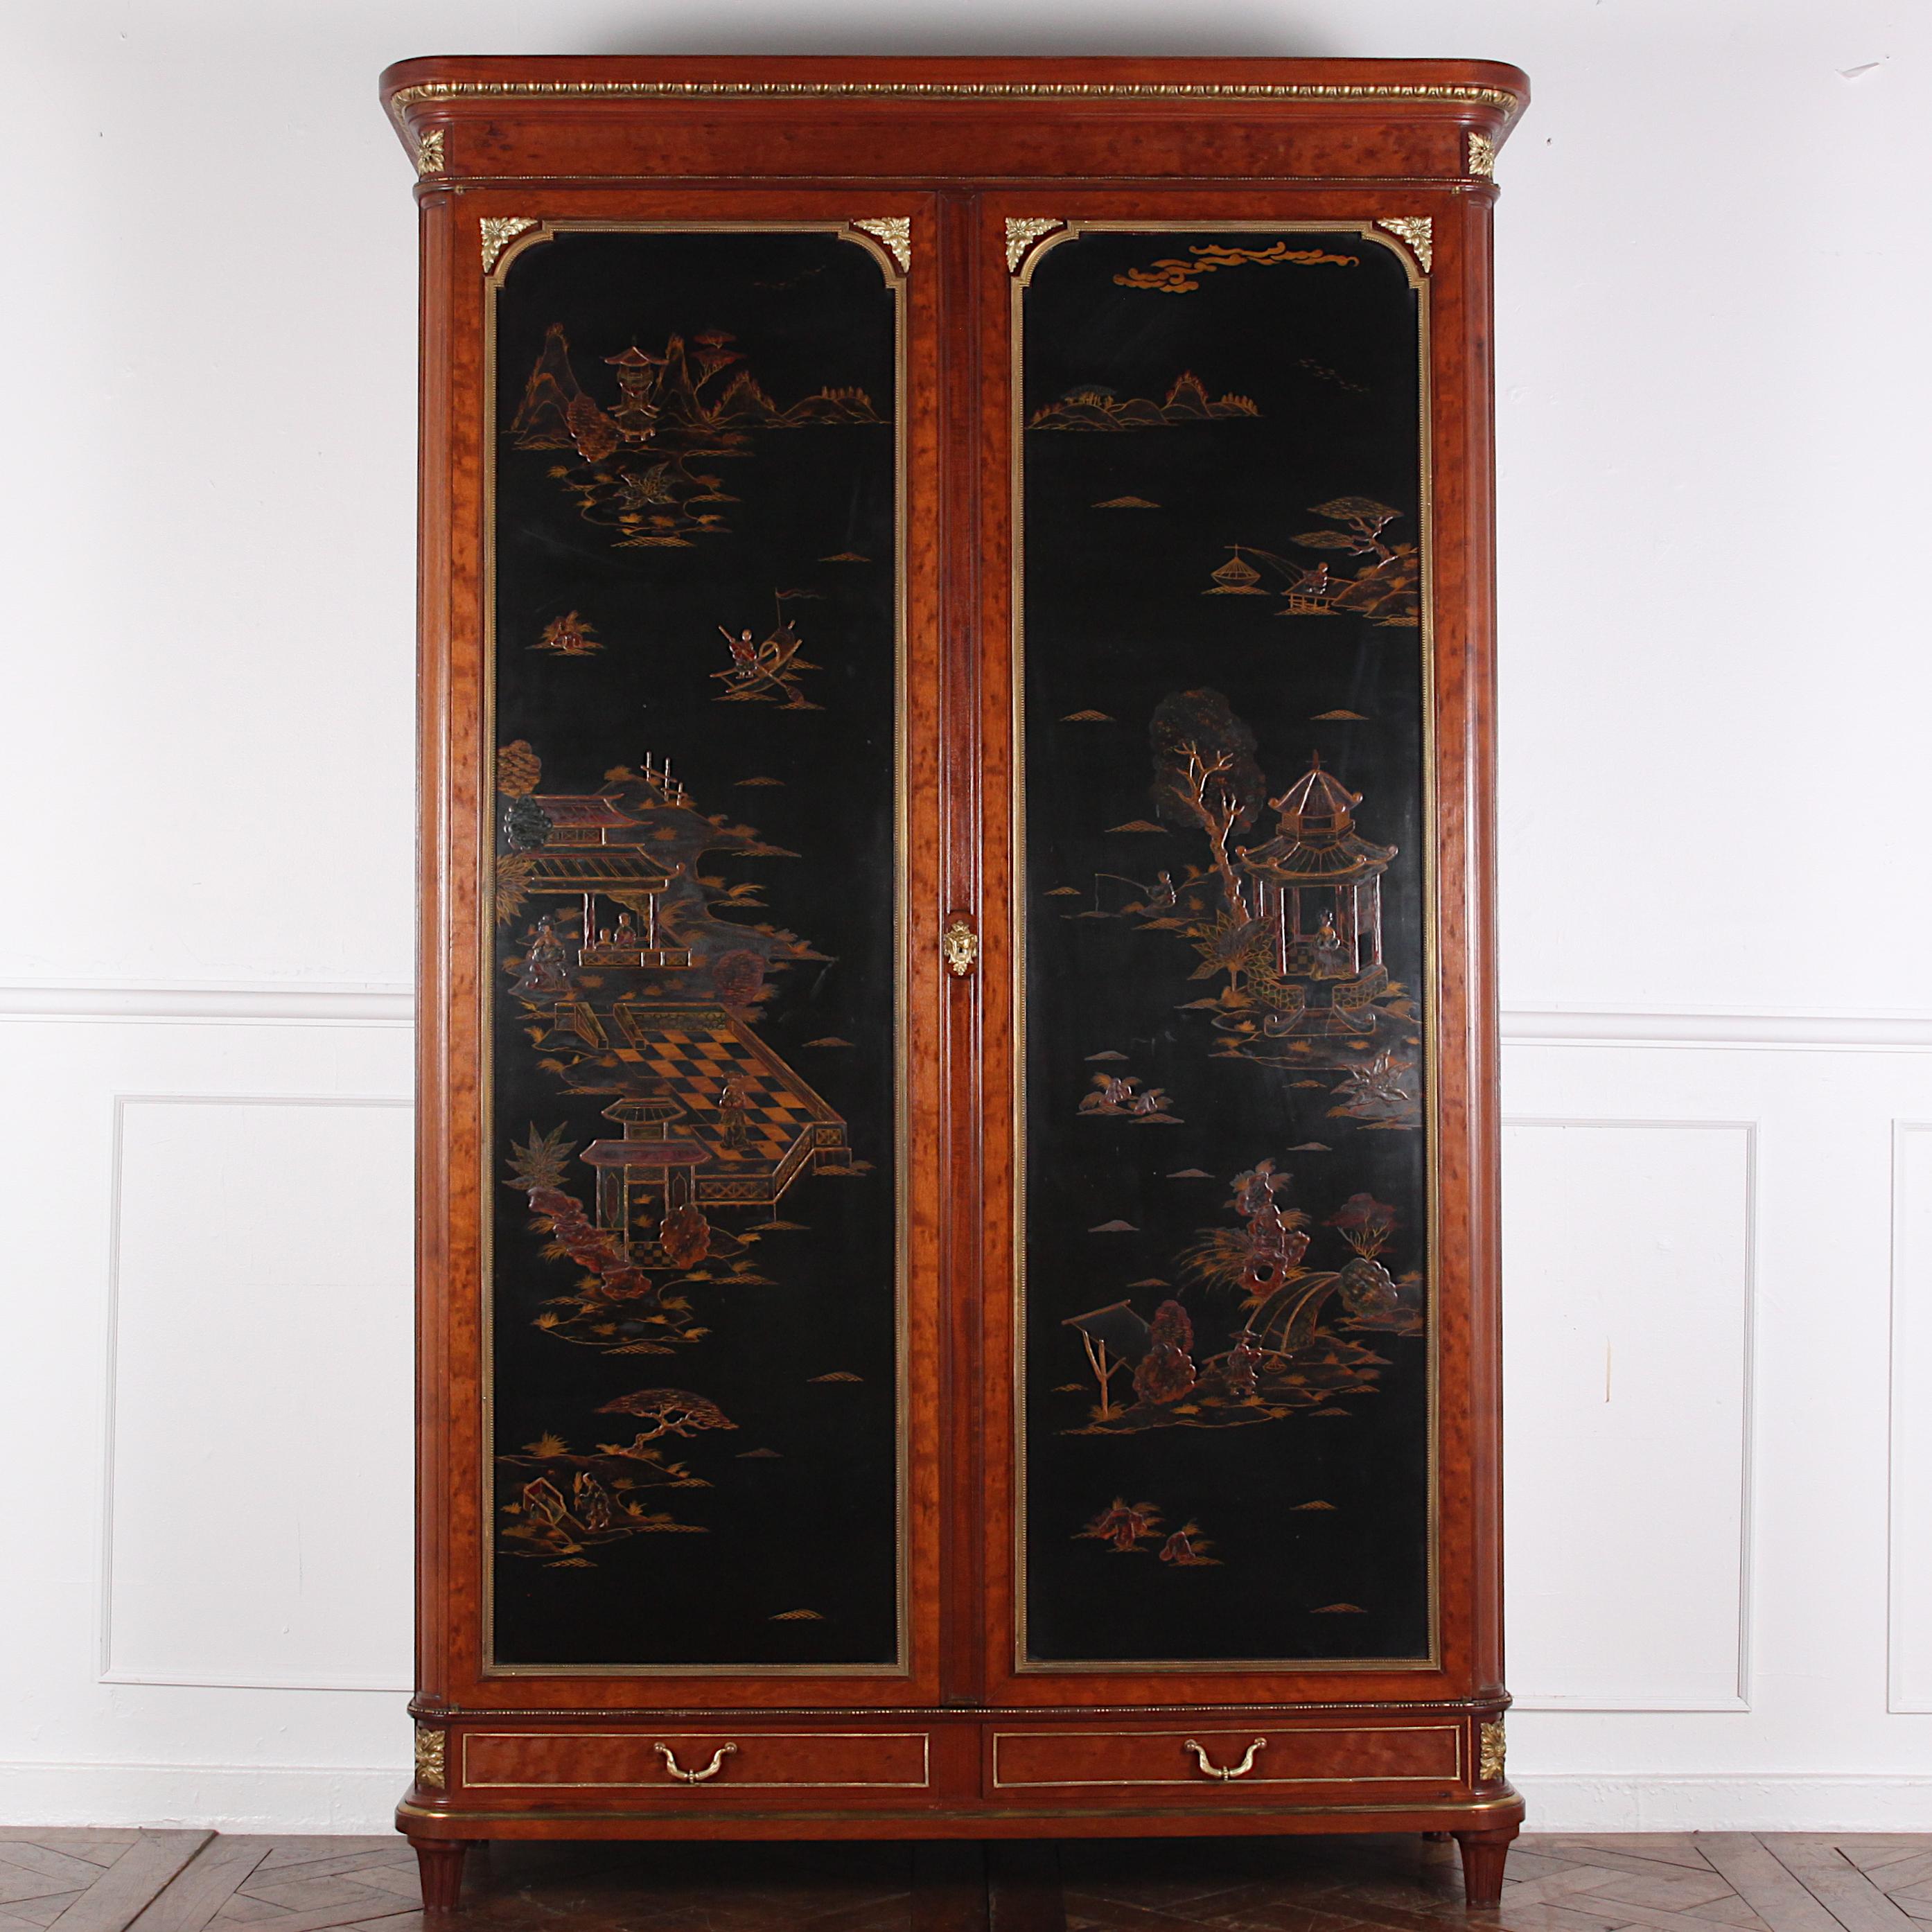 A lovely-quality and highly unusual late 19th century French Louis XVI style two-door armoire featuring dramatic ‘Japanned’ door panels in black lacquer with landscape and architectural scenery in colored lacquer and gilding. The contrasting case in